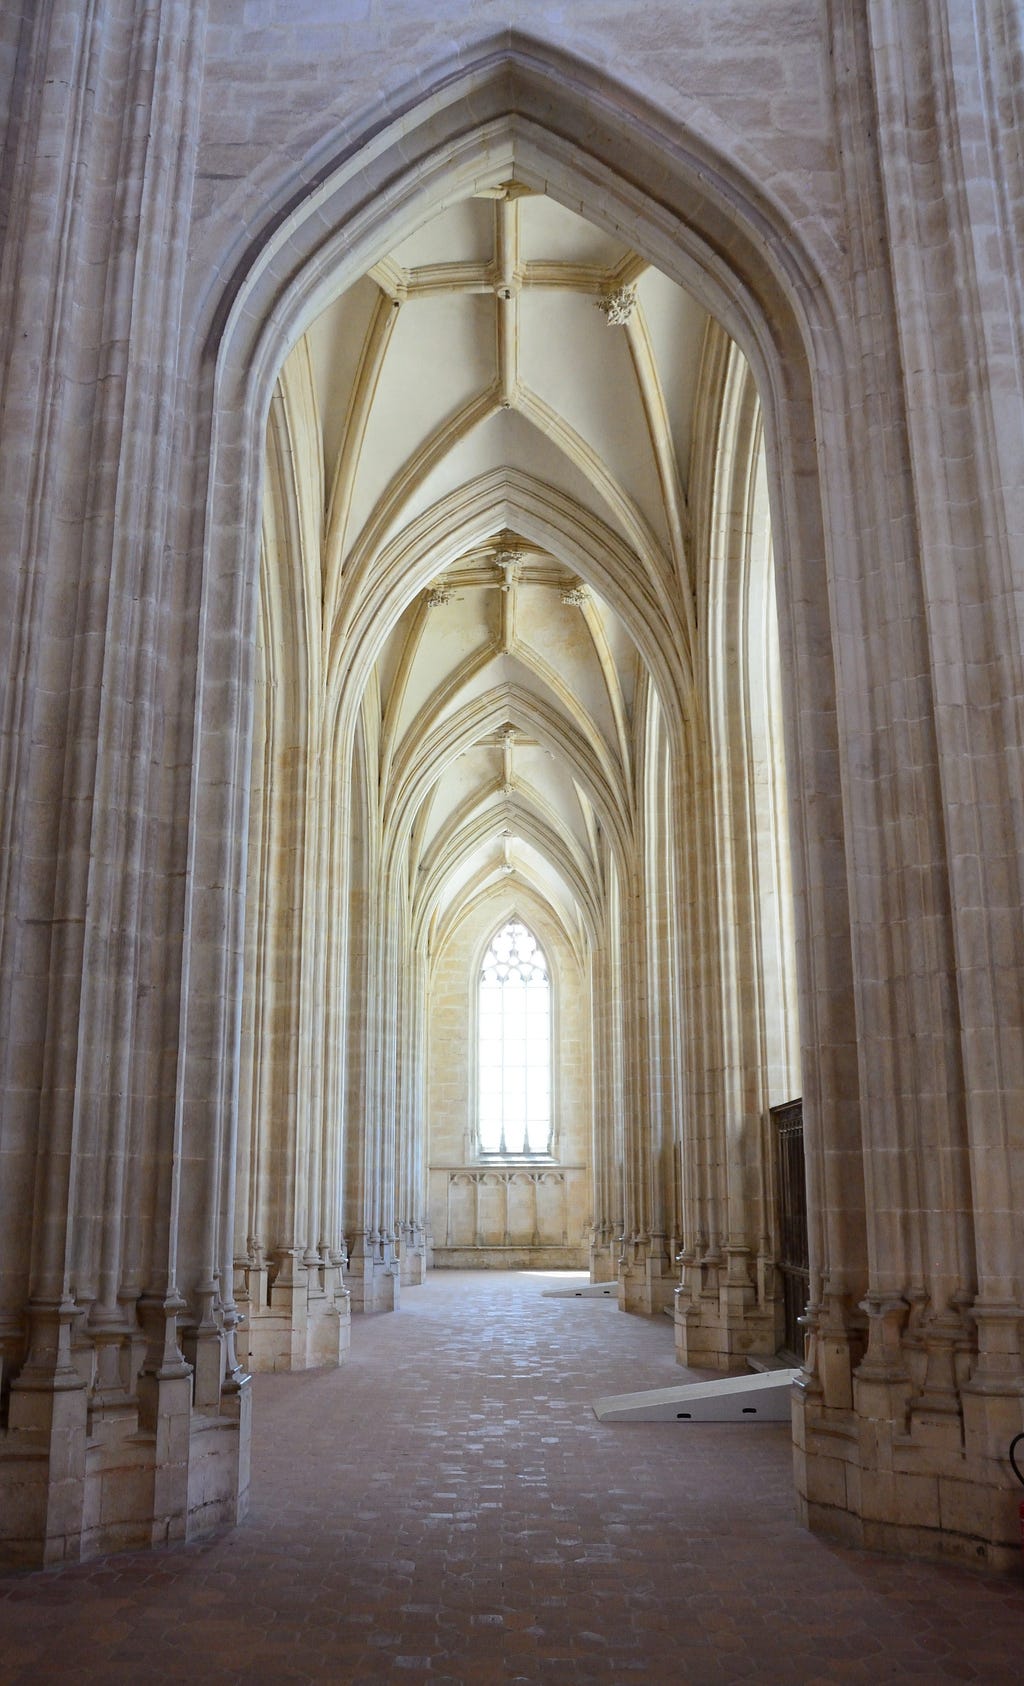 Image of vaulted ceilings and archways in a cathedral.